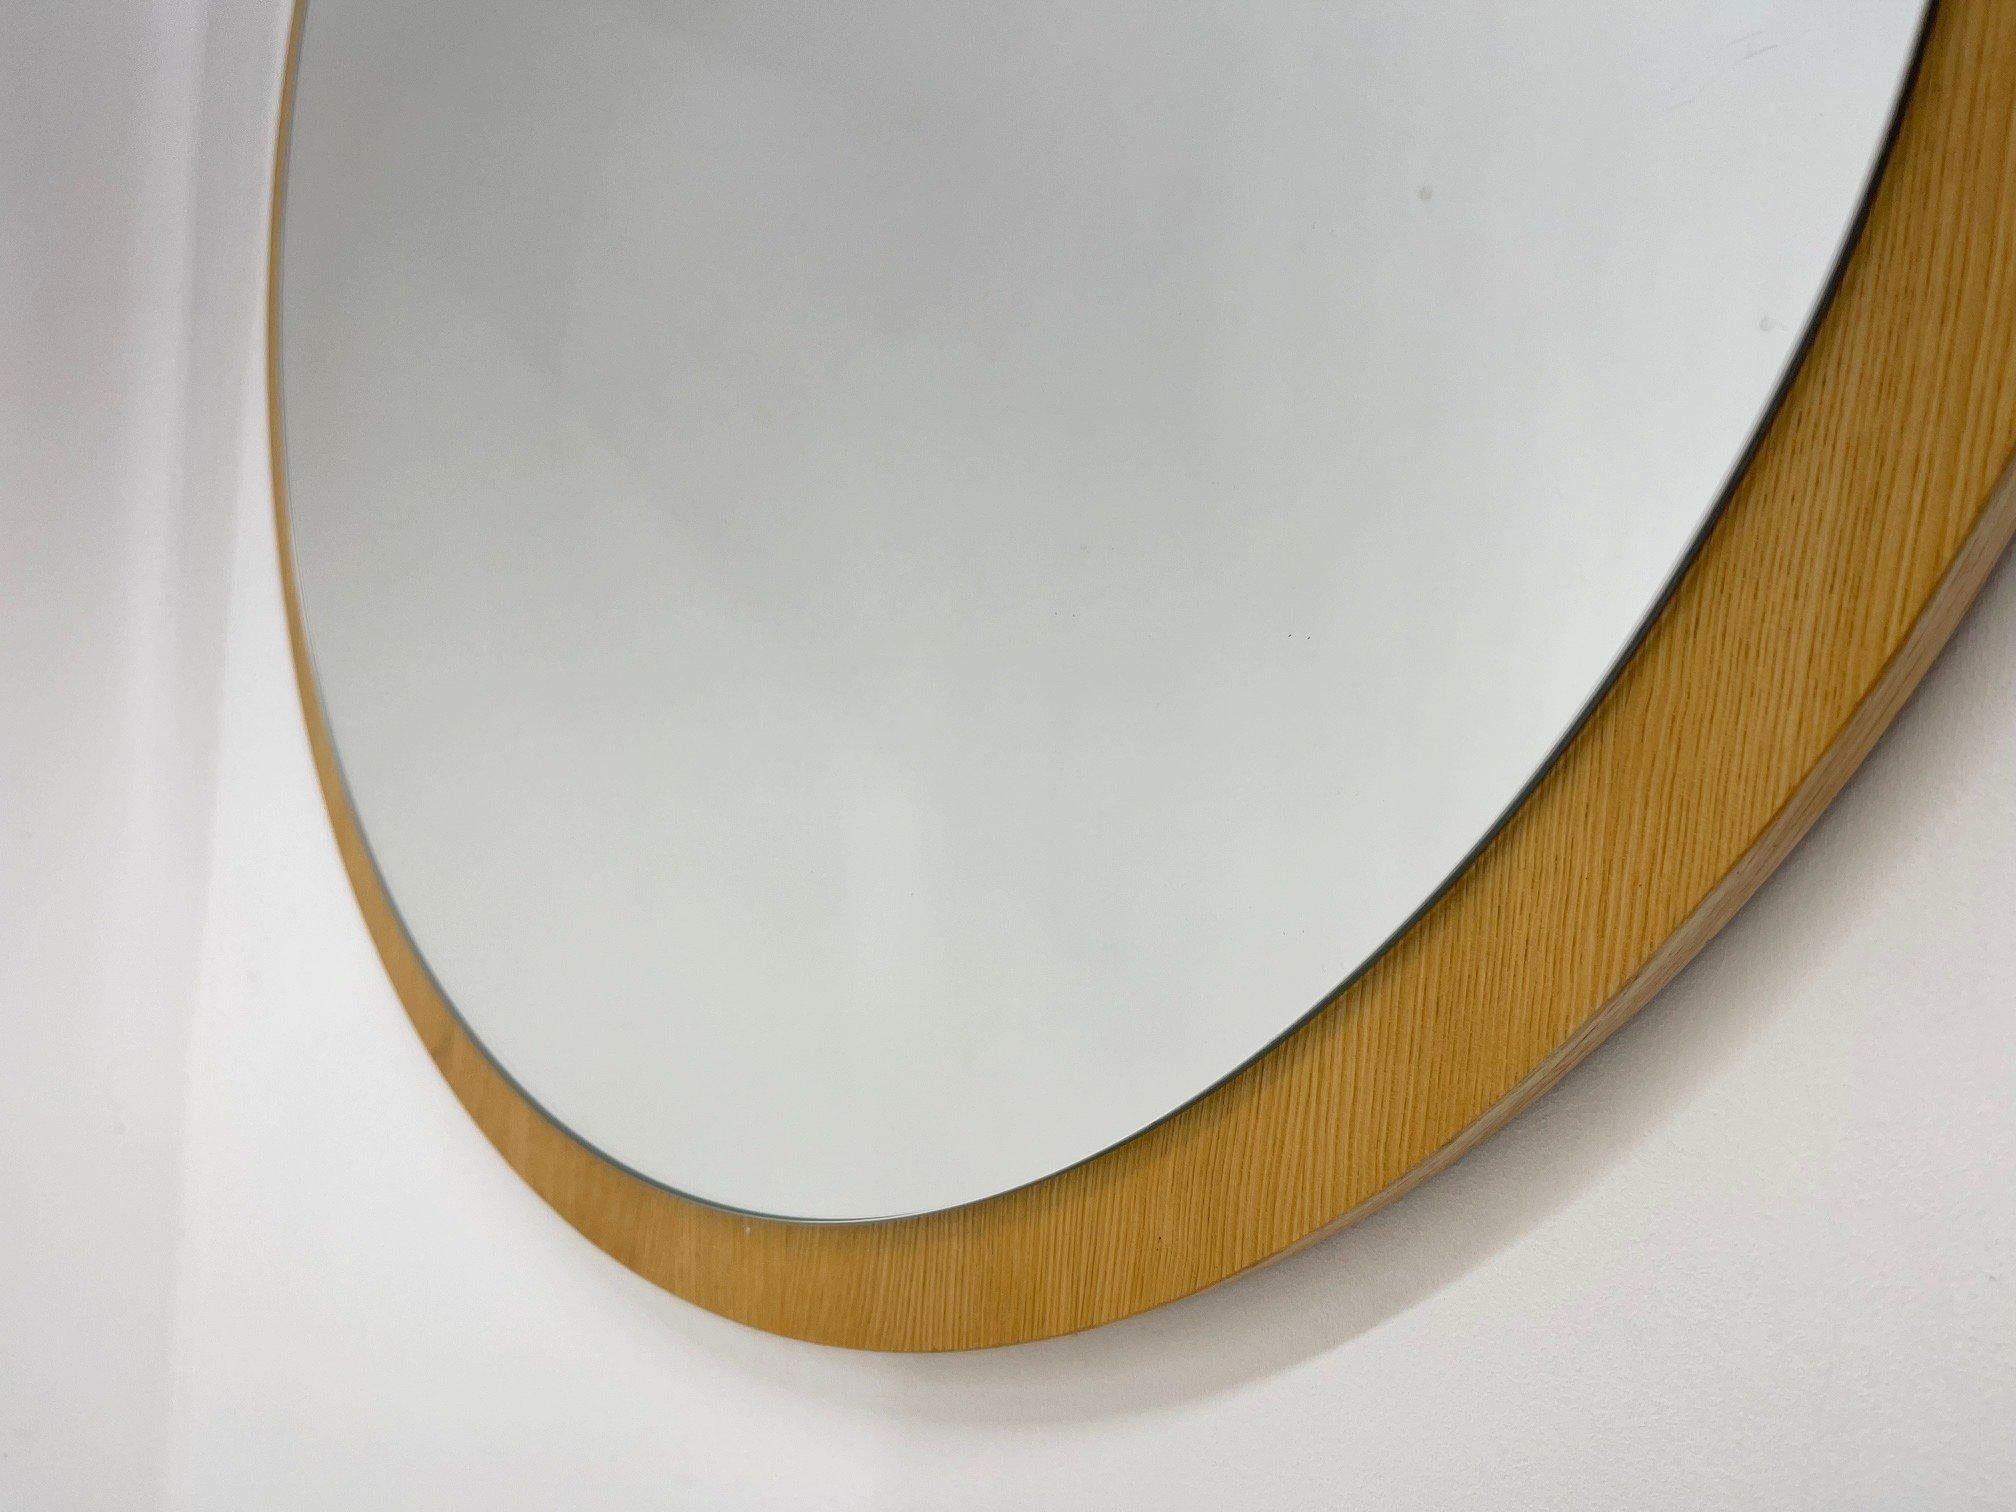 Vintage round wall mirror on wooden base from Czechoslovakia, made in the 1970's.